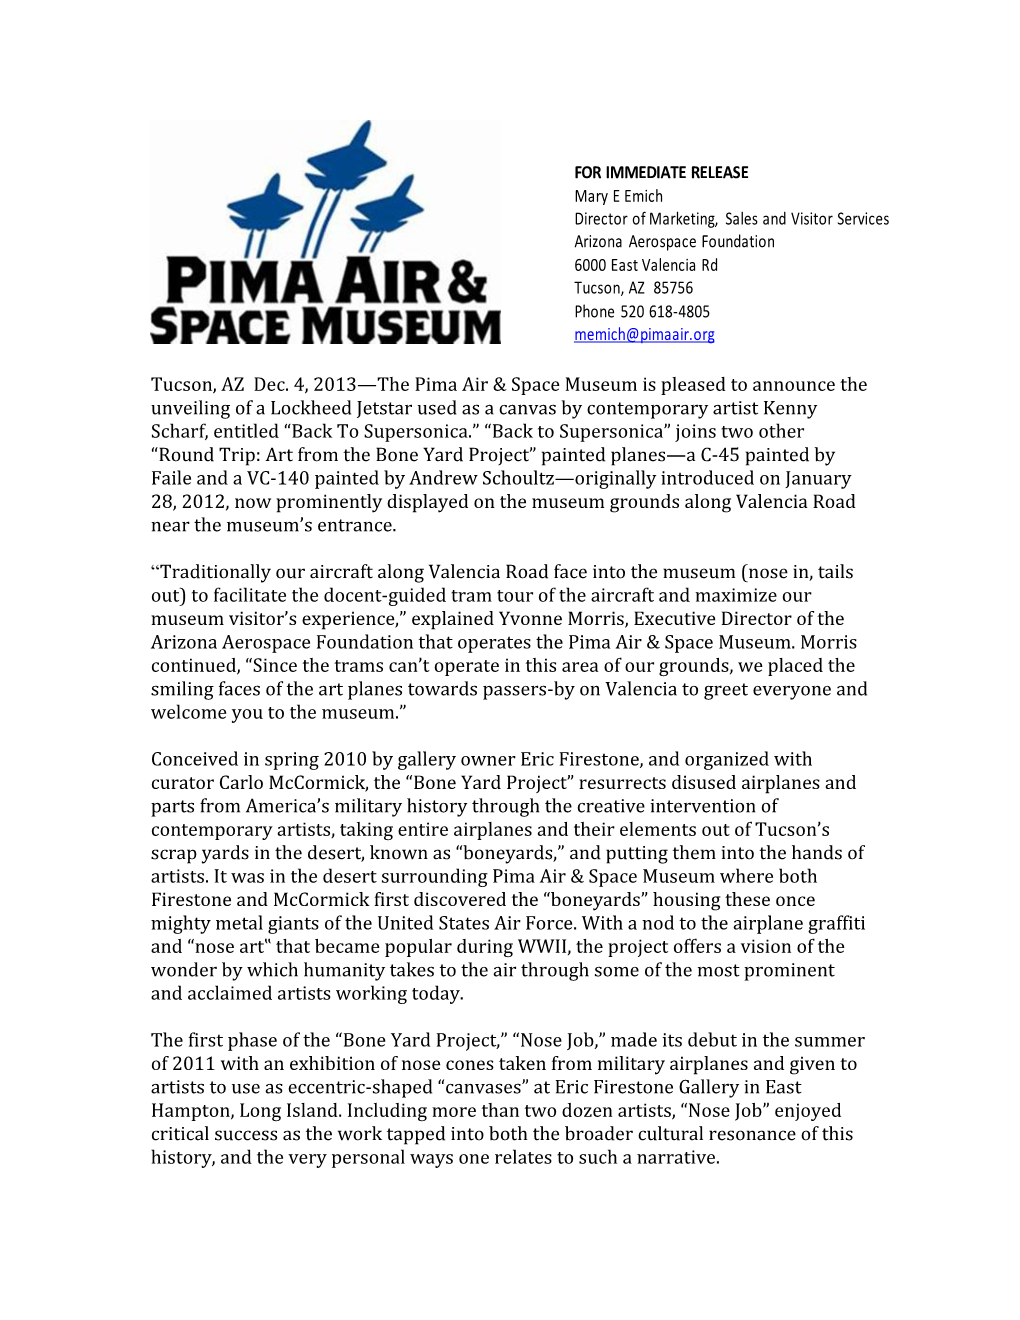 About Pima Air & Space Museum